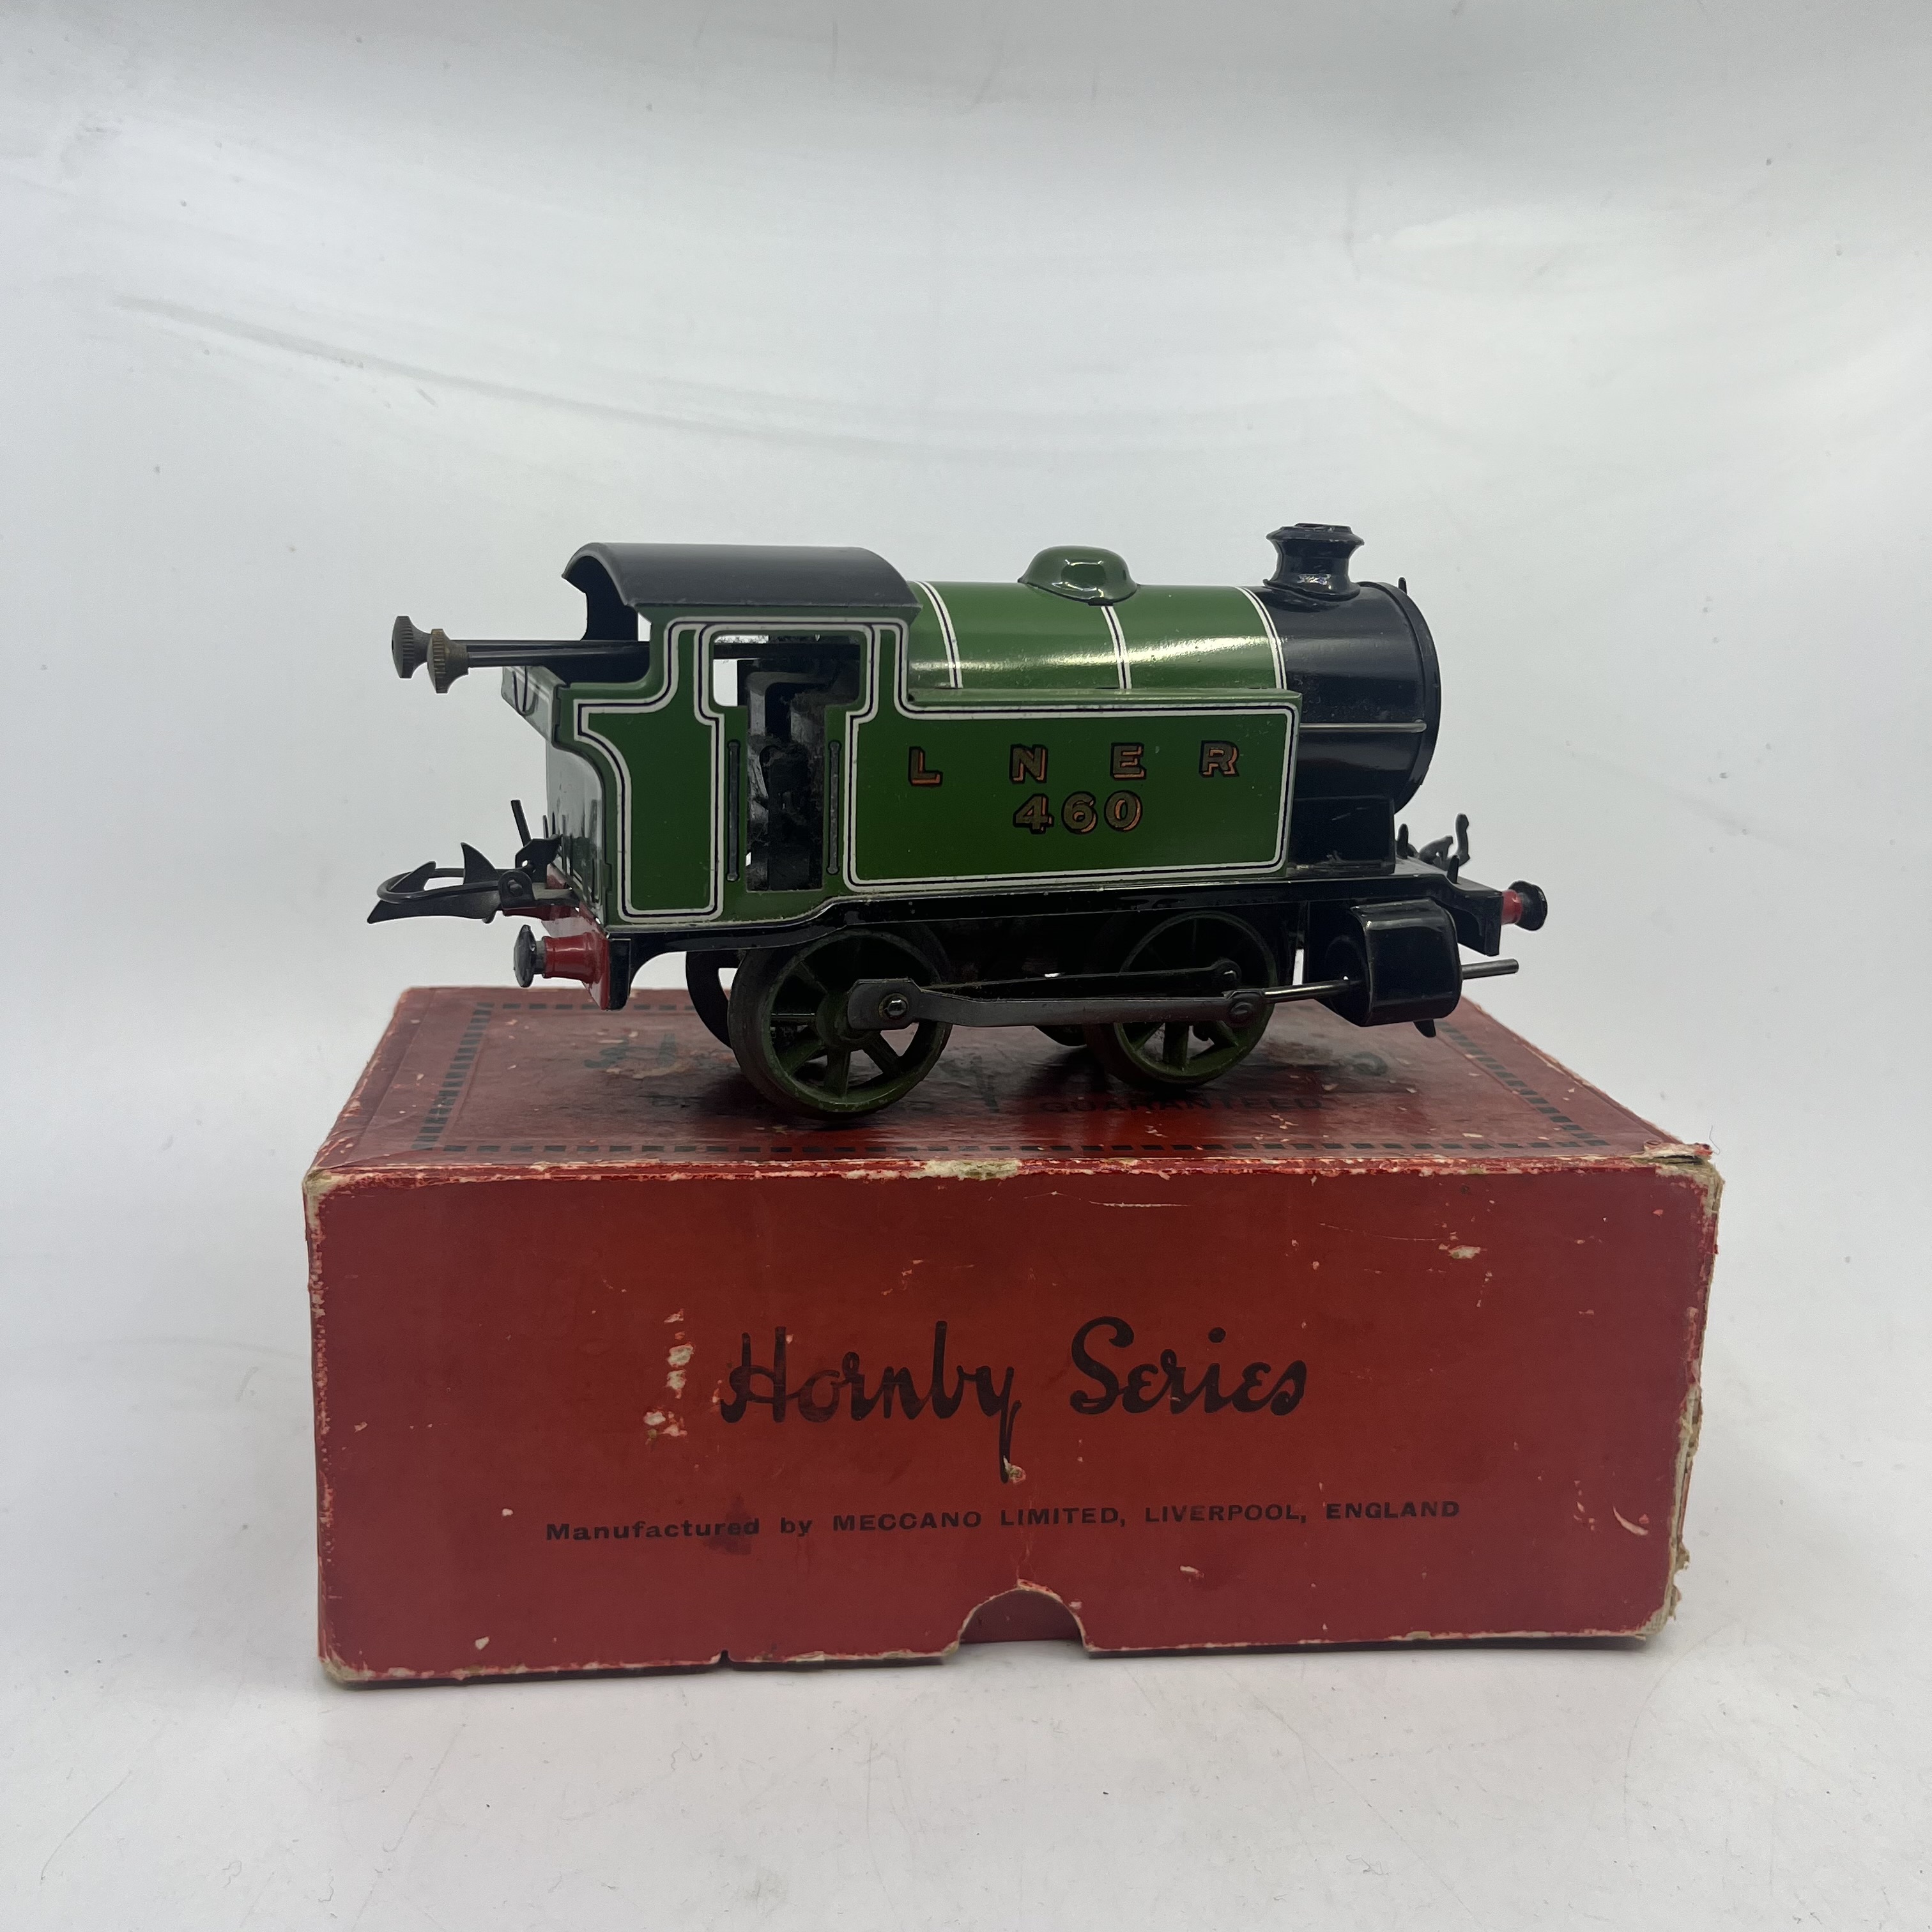 Hornby O Gauge antique railway interest: from a significant, private collection collected from - Image 2 of 4